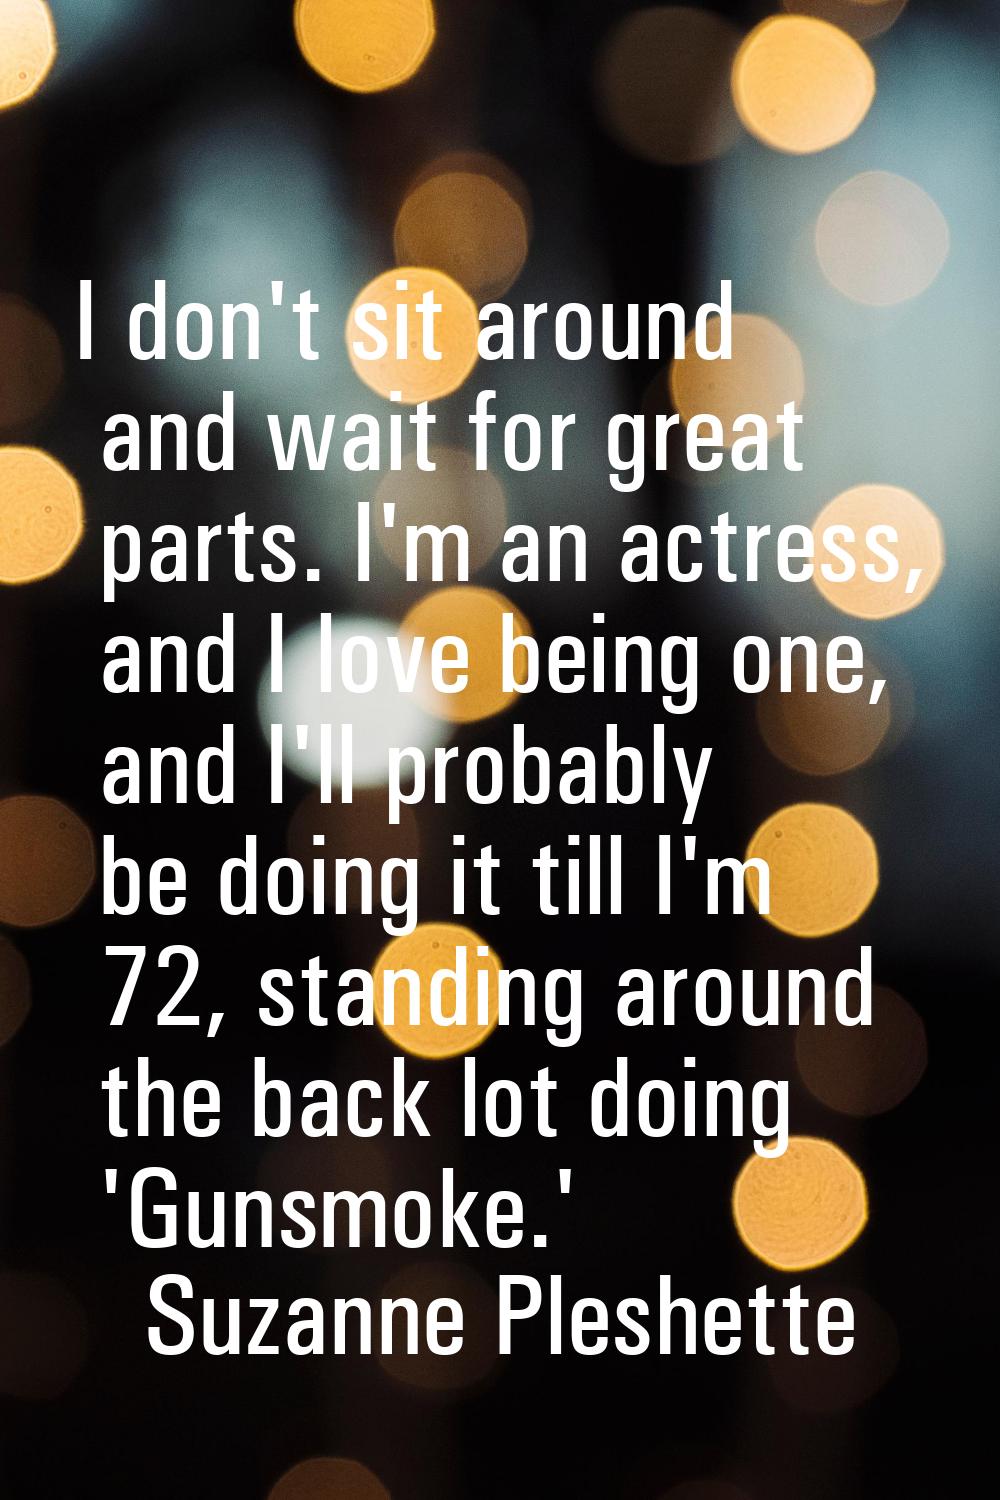 I don't sit around and wait for great parts. I'm an actress, and I love being one, and I'll probabl